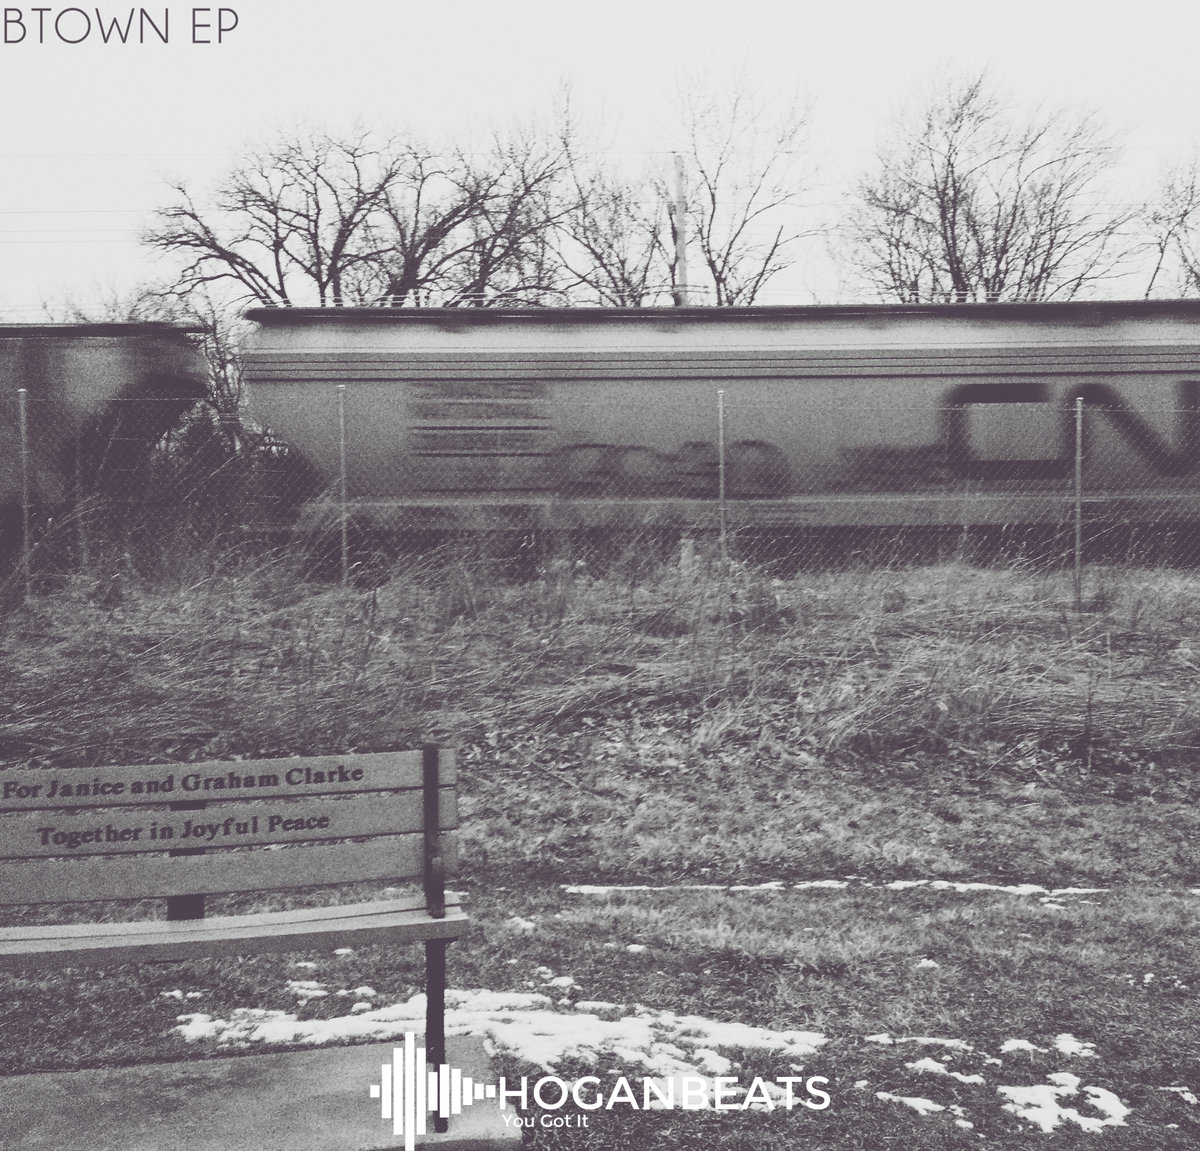 HoganBeats Btown EP front cover